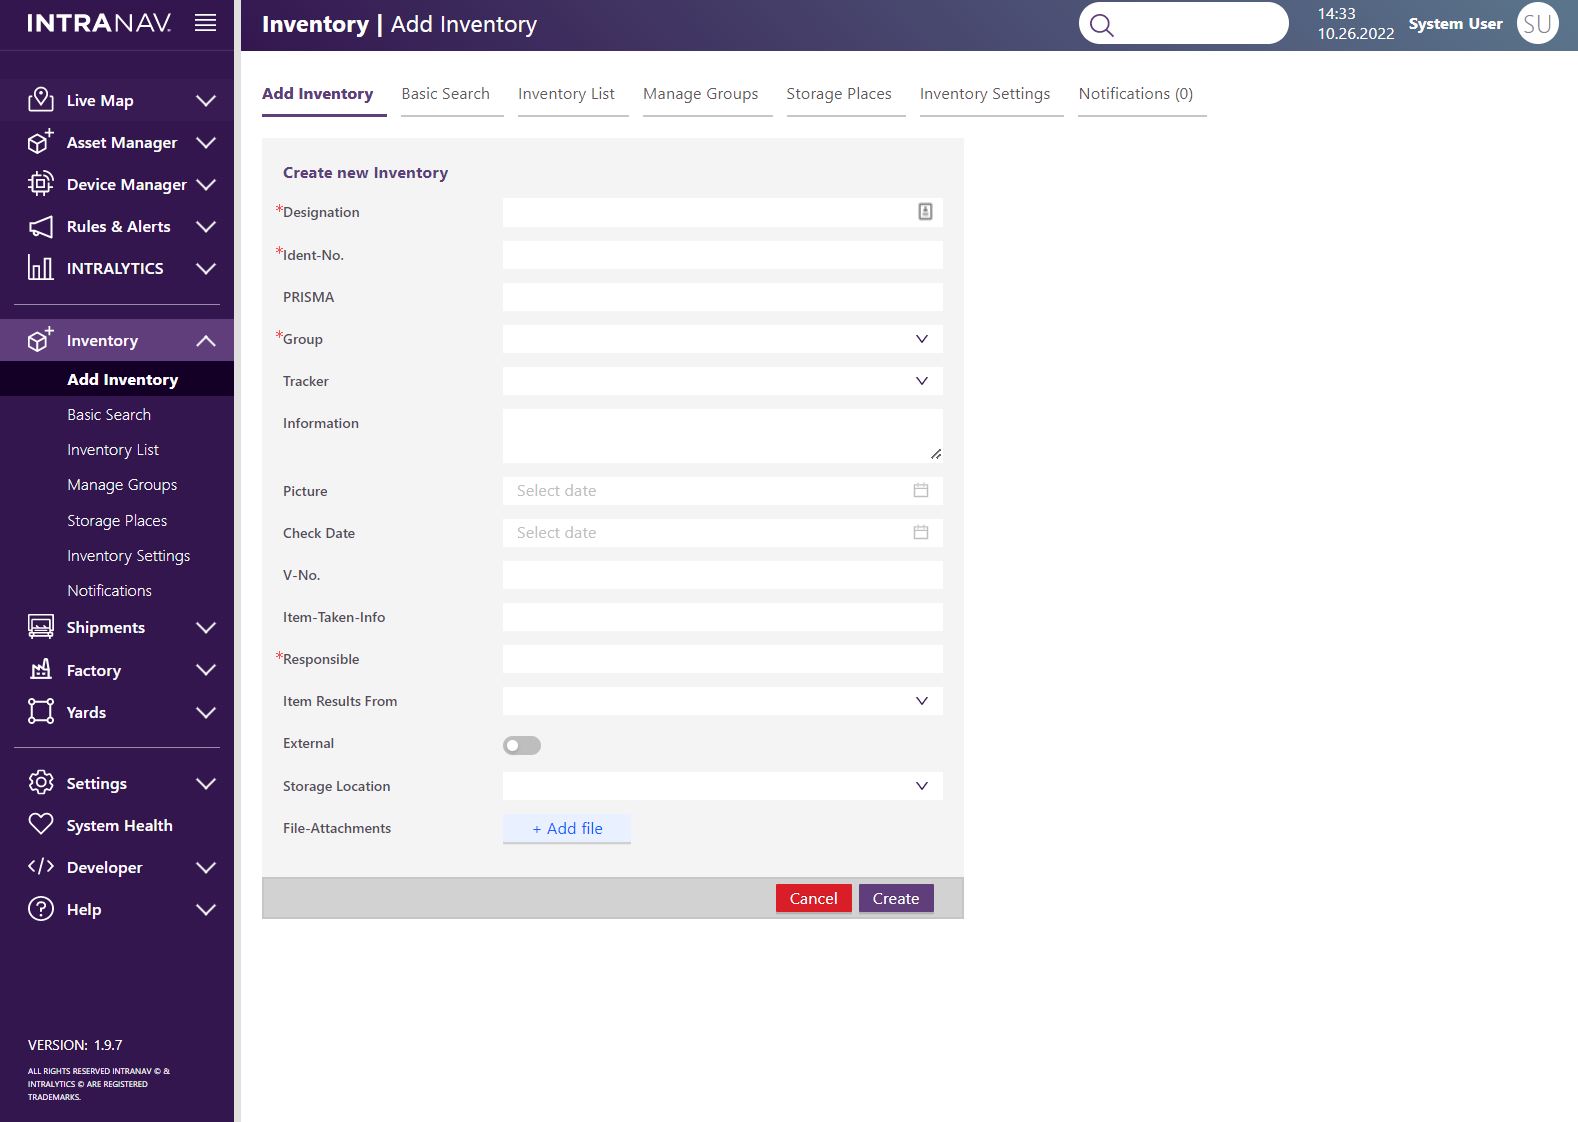 INTRANAV.IO Inventory Manager dashboard input screen allows the user to add inventory objects to the system. 